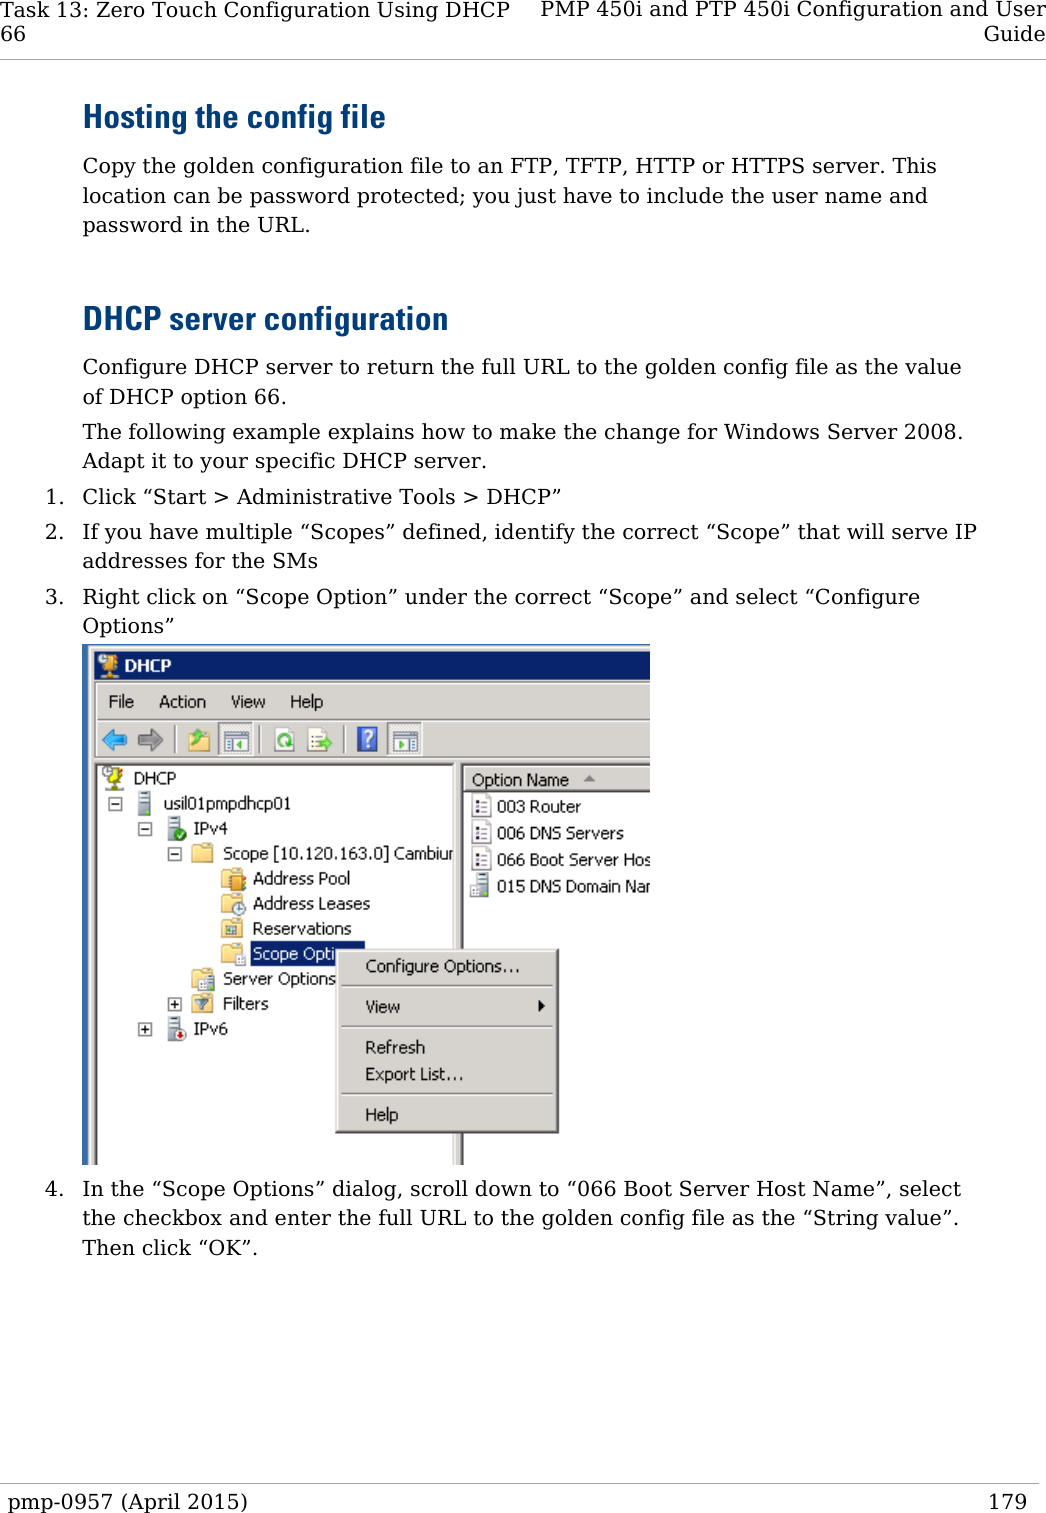 Task 13: Zero Touch Configuration Using DHCP   66 PMP 450i and PTP 450i Configuration and User Guide  Hosting the config file Copy the golden configuration file to an FTP, TFTP, HTTP or HTTPS server. This location can be password protected; you just have to include the user name and password in the URL.  DHCP server configuration Configure DHCP server to return the full URL to the golden config file as the value of DHCP option 66.  The following example explains how to make the change for Windows Server 2008. Adapt it to your specific DHCP server. 1. Click “Start &gt; Administrative Tools &gt; DHCP” 2. If you have multiple “Scopes” defined, identify the correct “Scope” that will serve IP addresses for the SMs 3. Right click on “Scope Option” under the correct “Scope” and select “Configure Options”    4. In the “Scope Options” dialog, scroll down to “066 Boot Server Host Name”, select the checkbox and enter the full URL to the golden config file as the “String value”. Then click “OK”.  pmp-0957 (April 2015)   179  